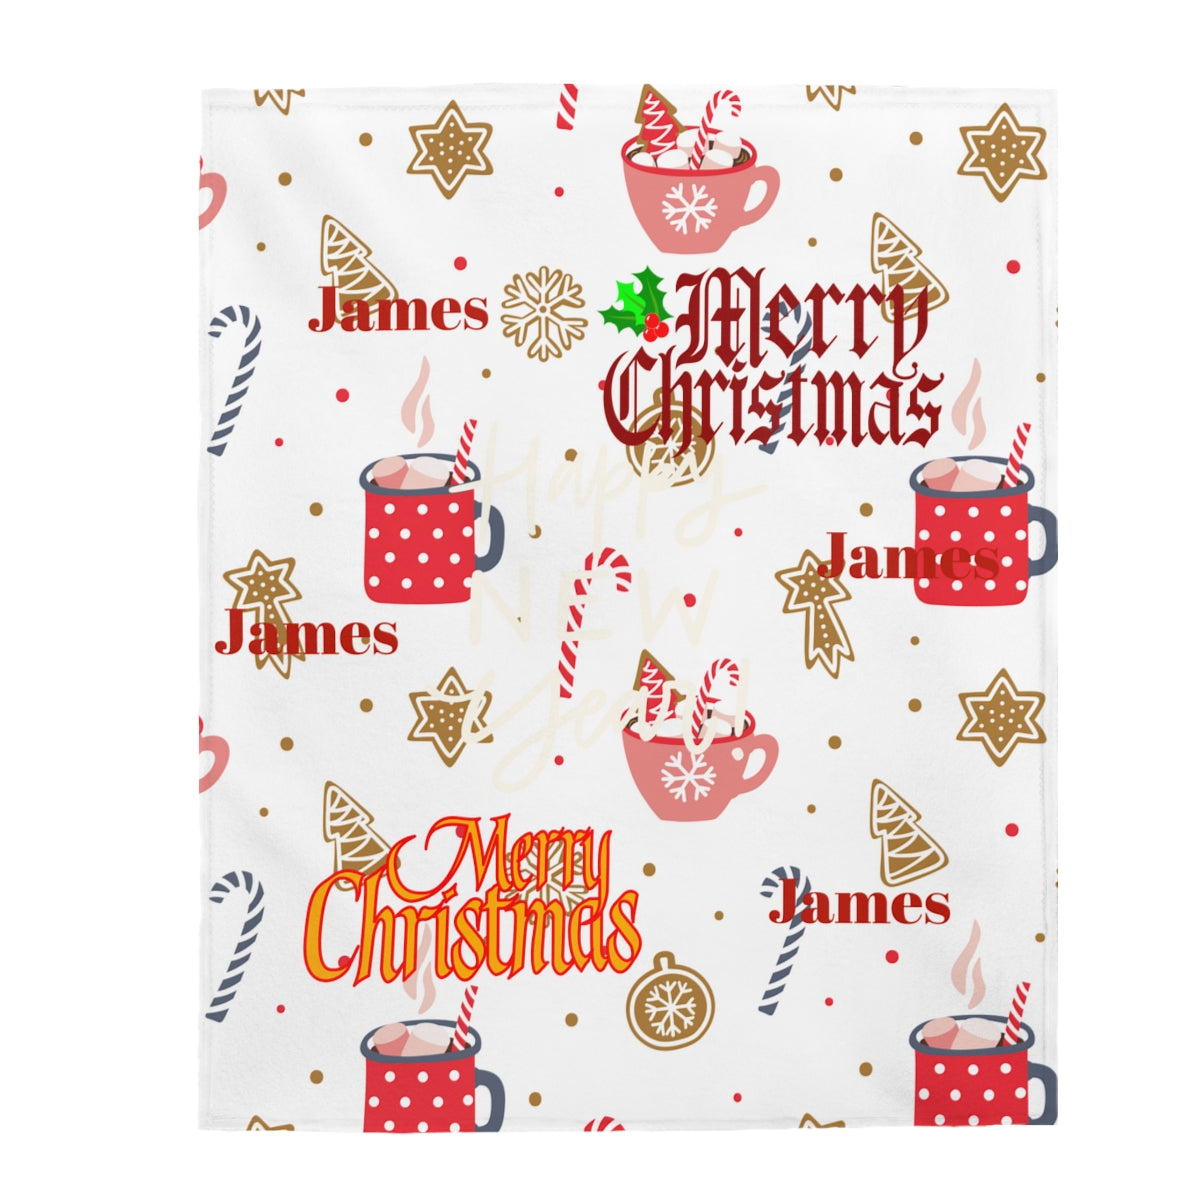 Kids Throw Blankets Personalised, Merry Christmas Theme, Baby Blanket, Plush Veveteen Super Soft Cozy Throw Blankets, 3 Sizes